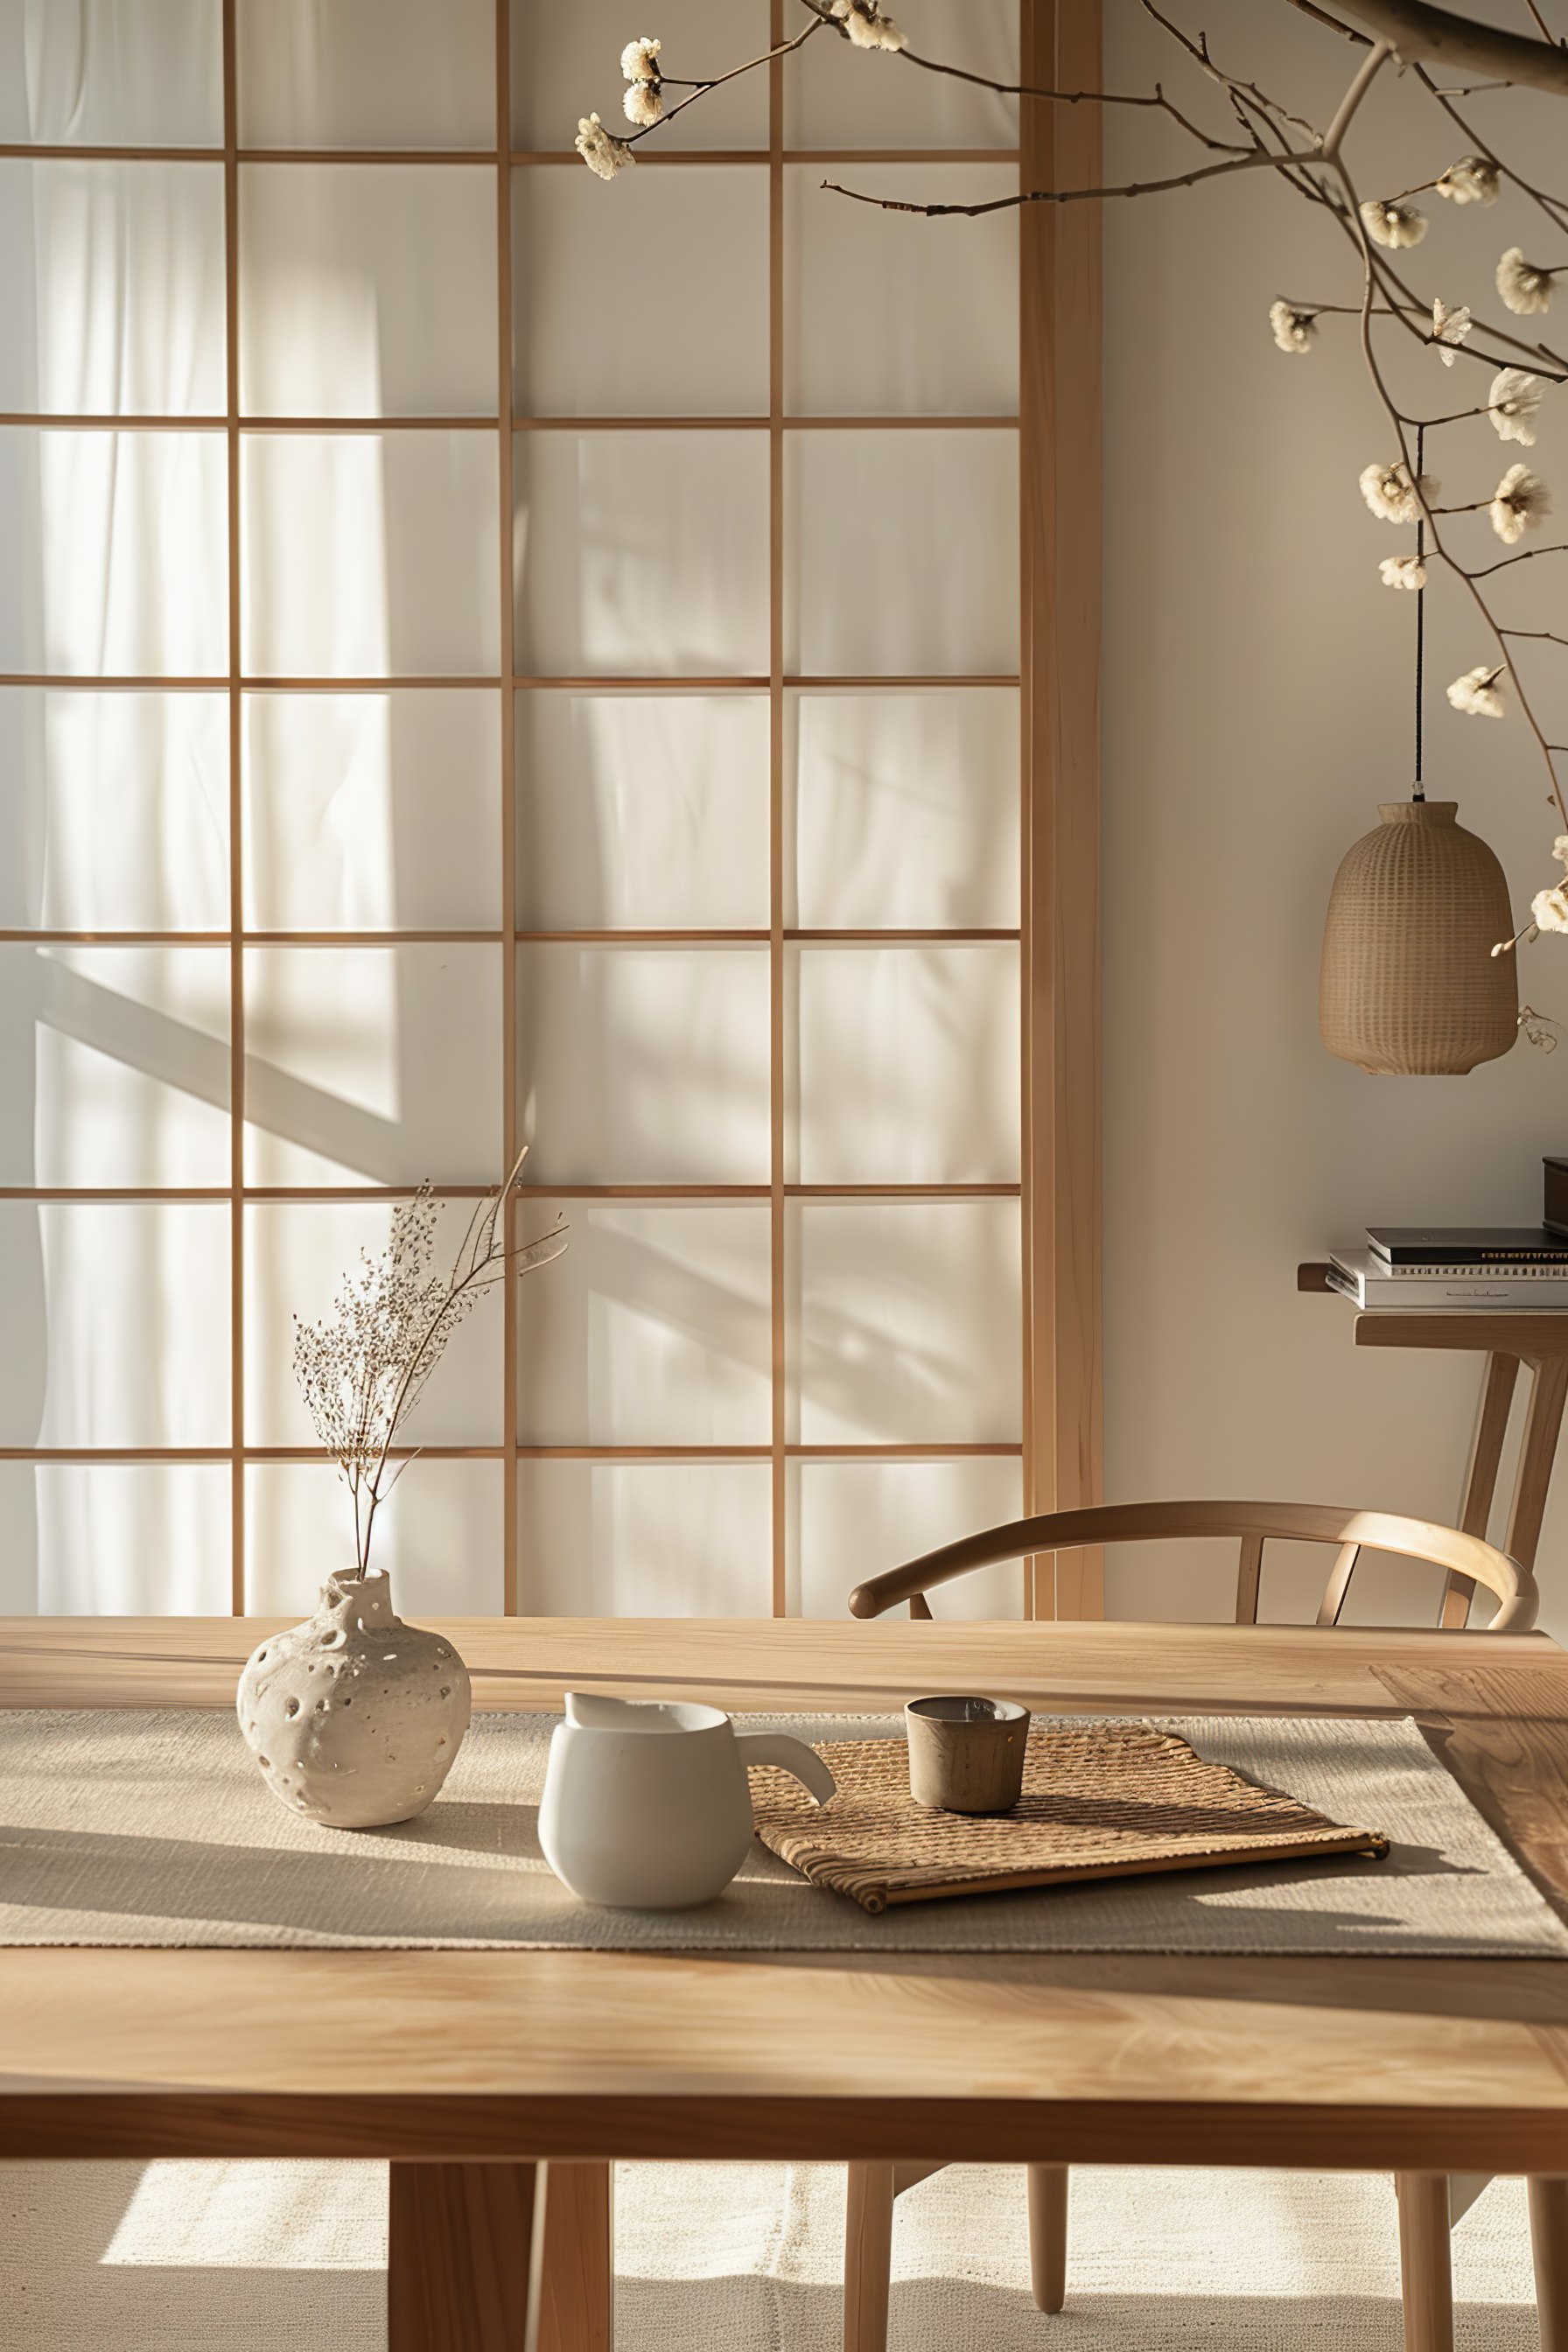 A serene dining setup with a wooden table, vase with branches, teapot, and a wicker place mat, bathed in warm sunlight filtering through window panes.